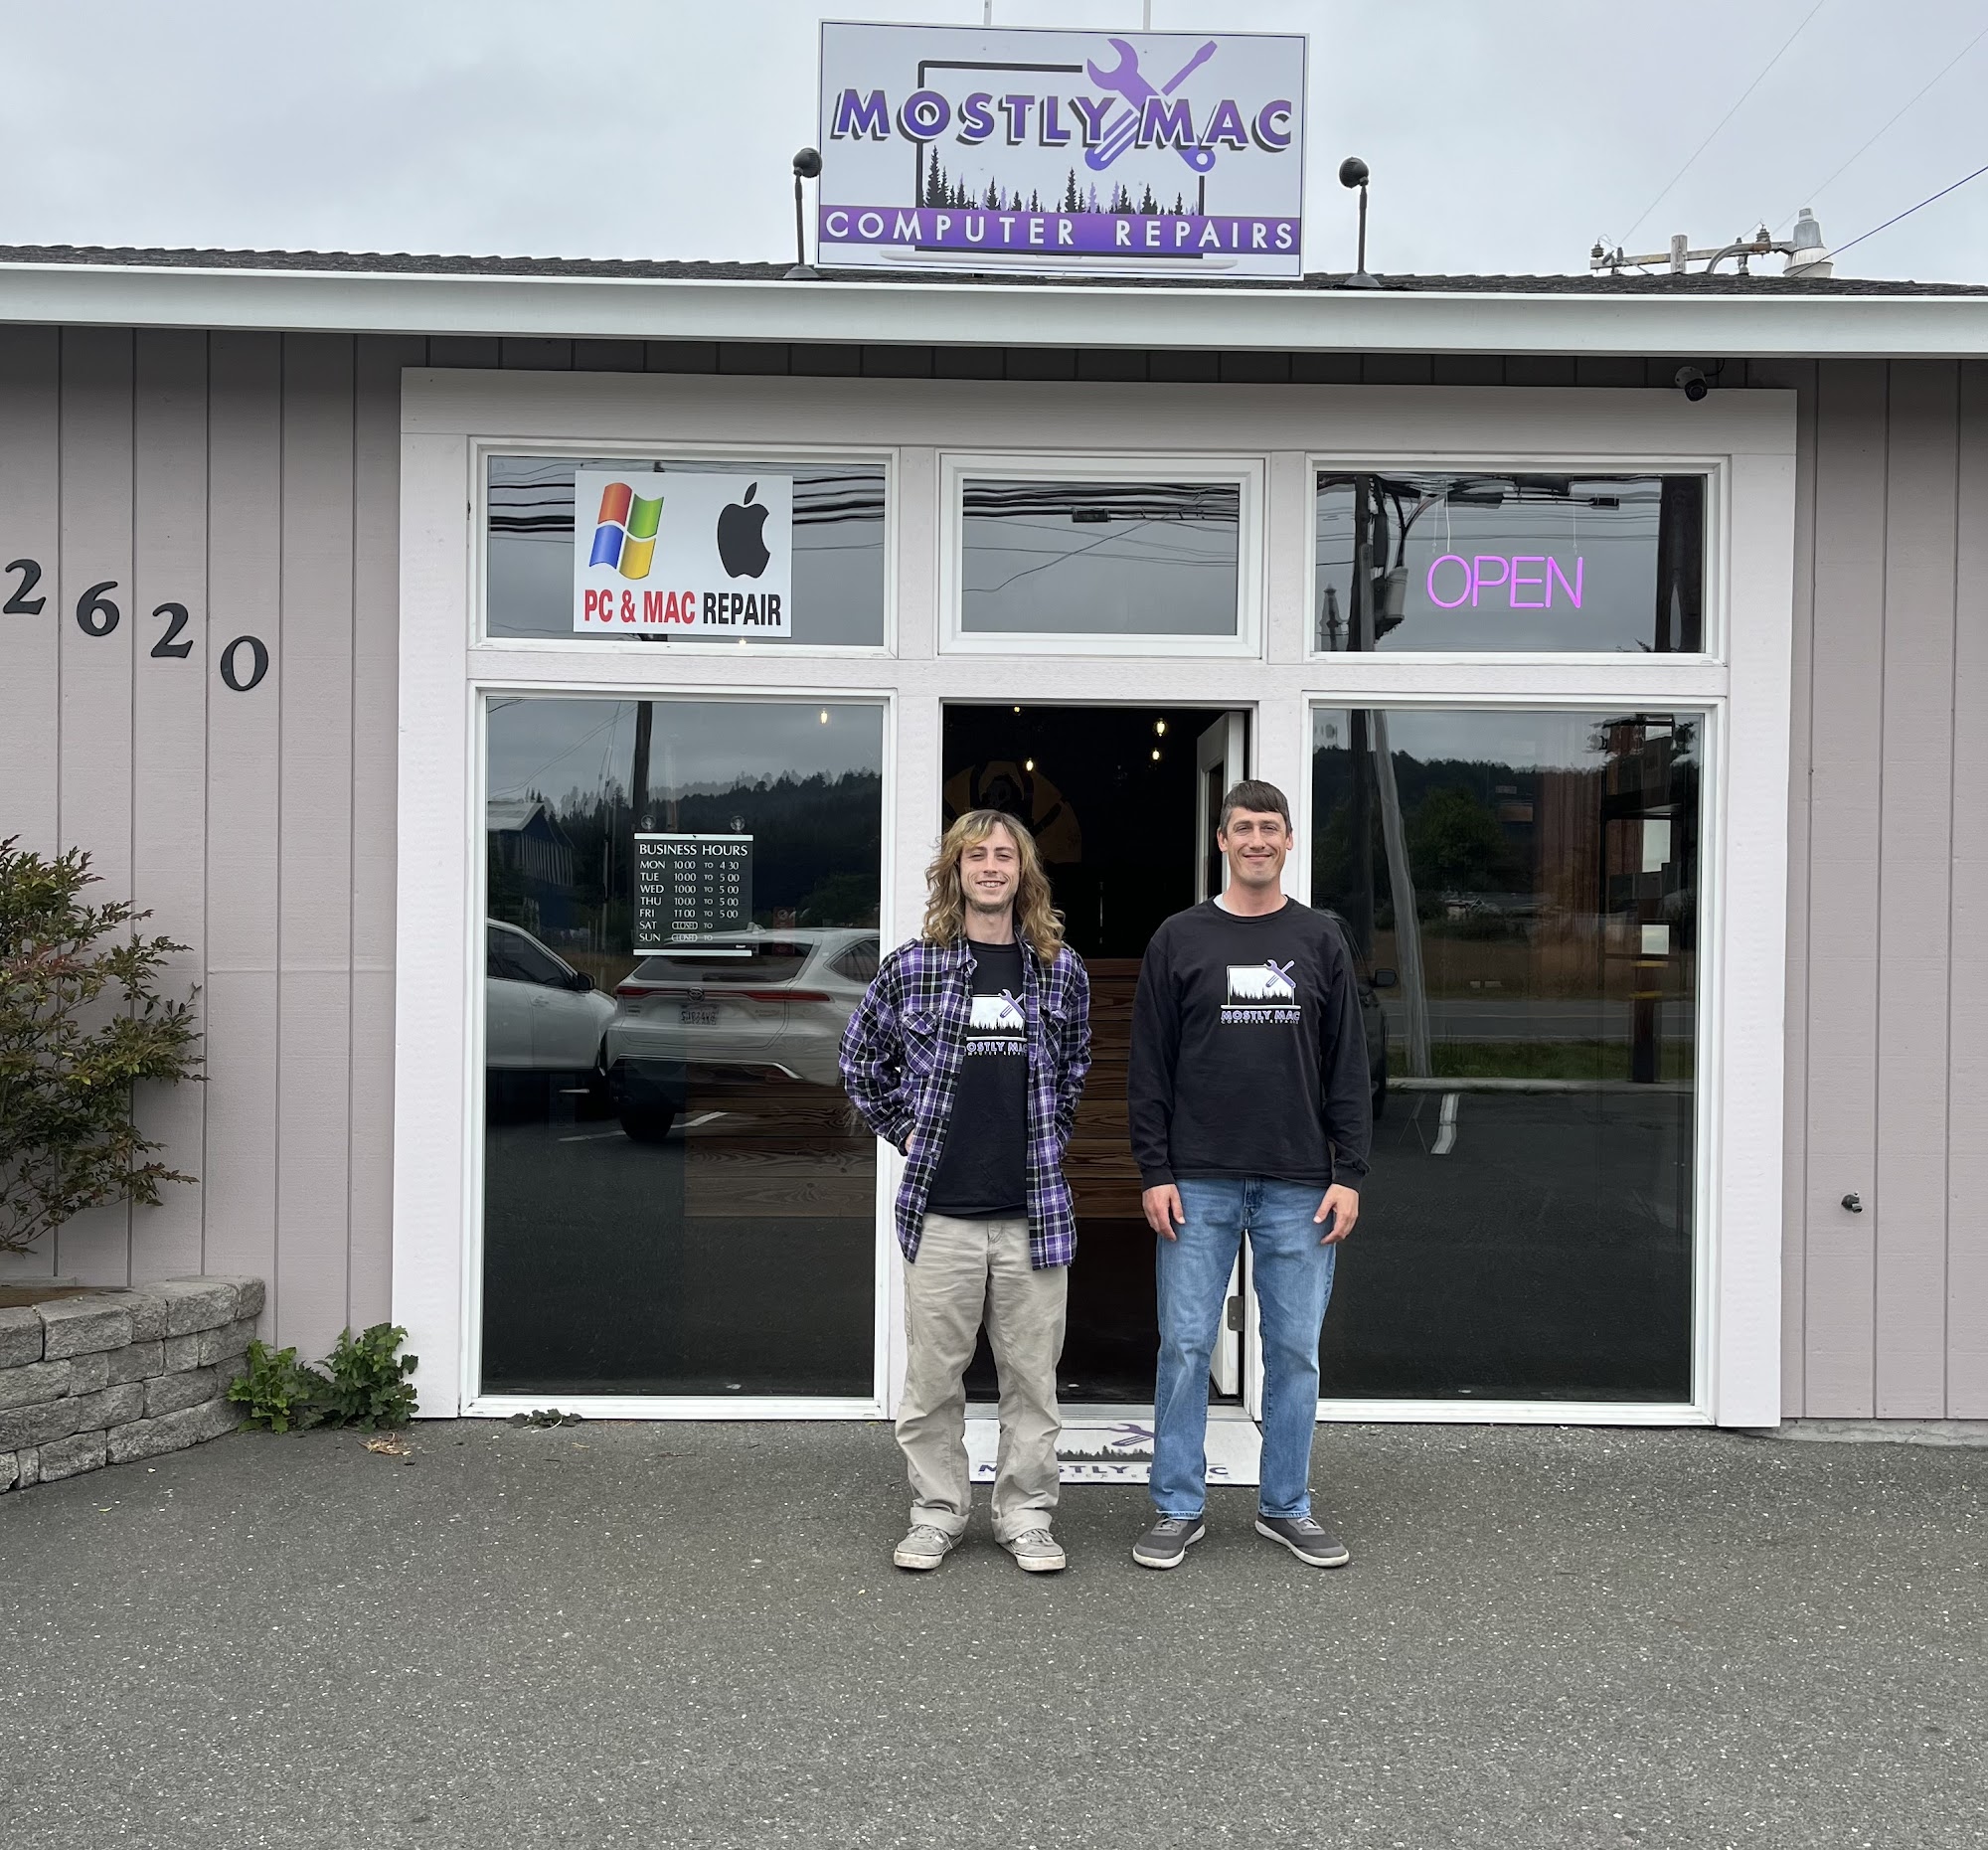 Mostly Mac Computer Repair 2620 Central Ave, McKinleyville California 95519